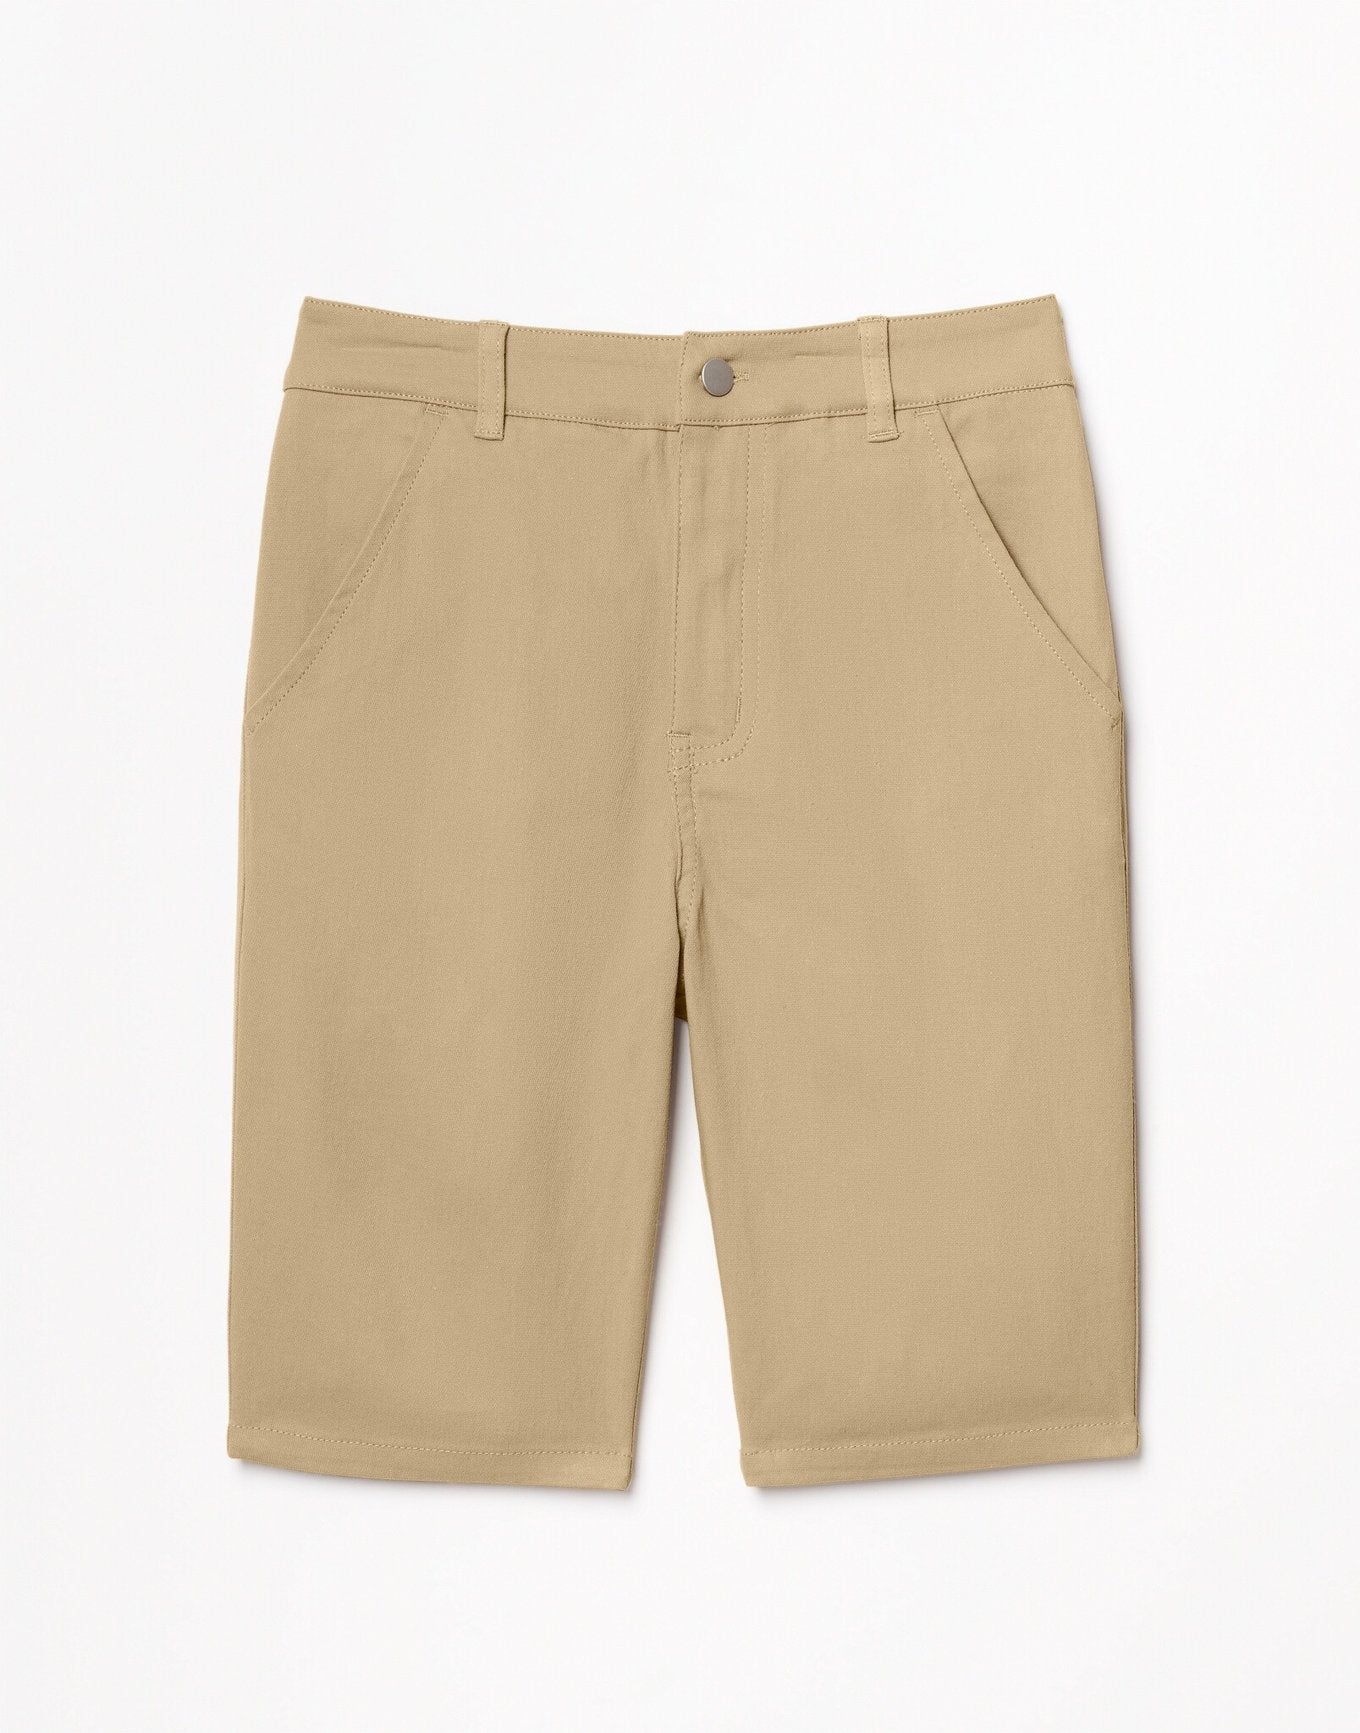 Outlines Kids John in color Almond Buff and shape shorts